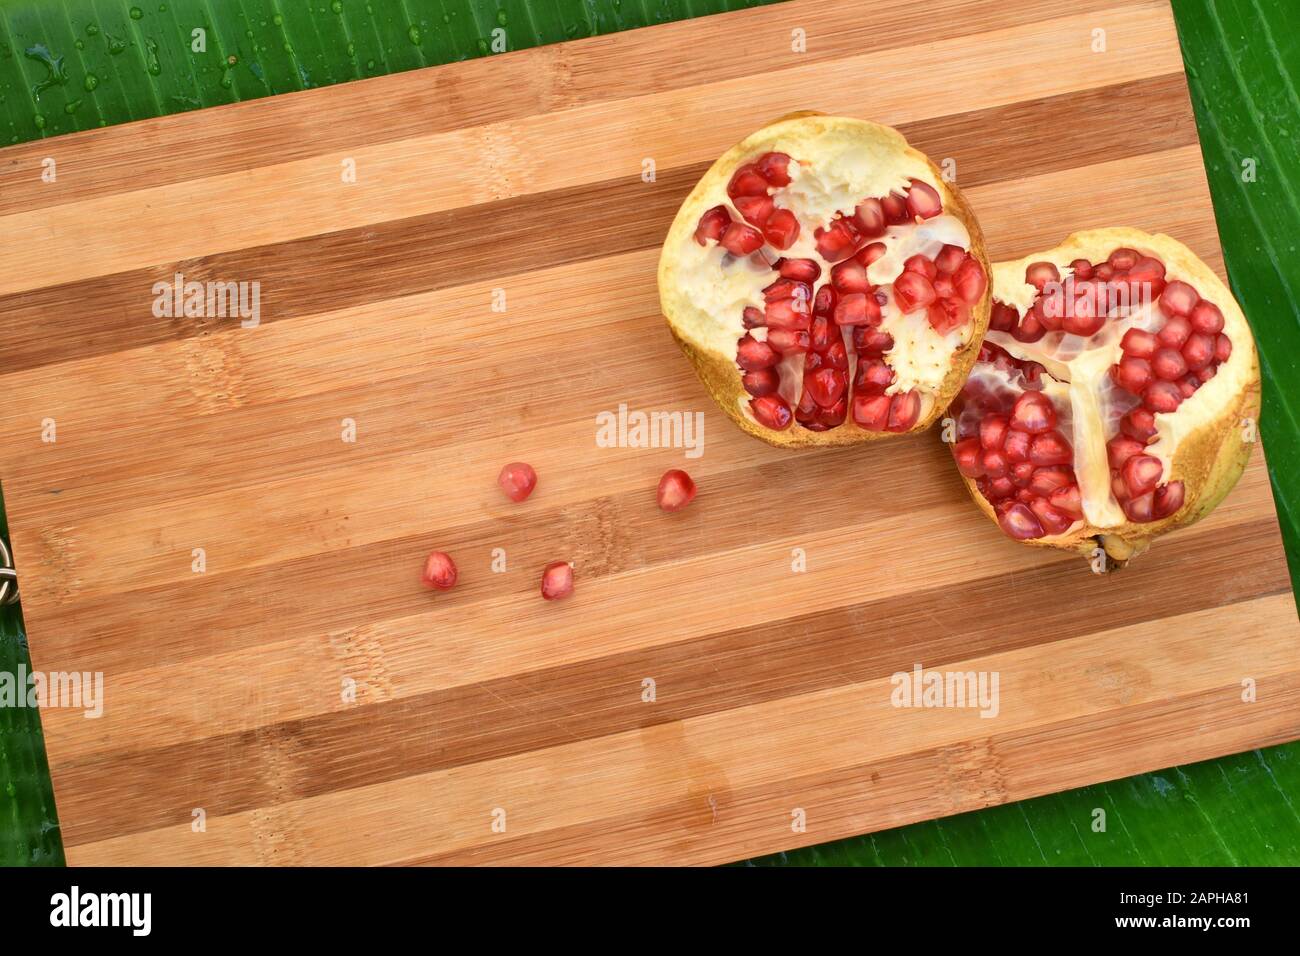 https://c8.alamy.com/comp/2APHA81/beautiful-picture-of-a-chopping-boards-with-fruits-and-leafs-2APHA81.jpg